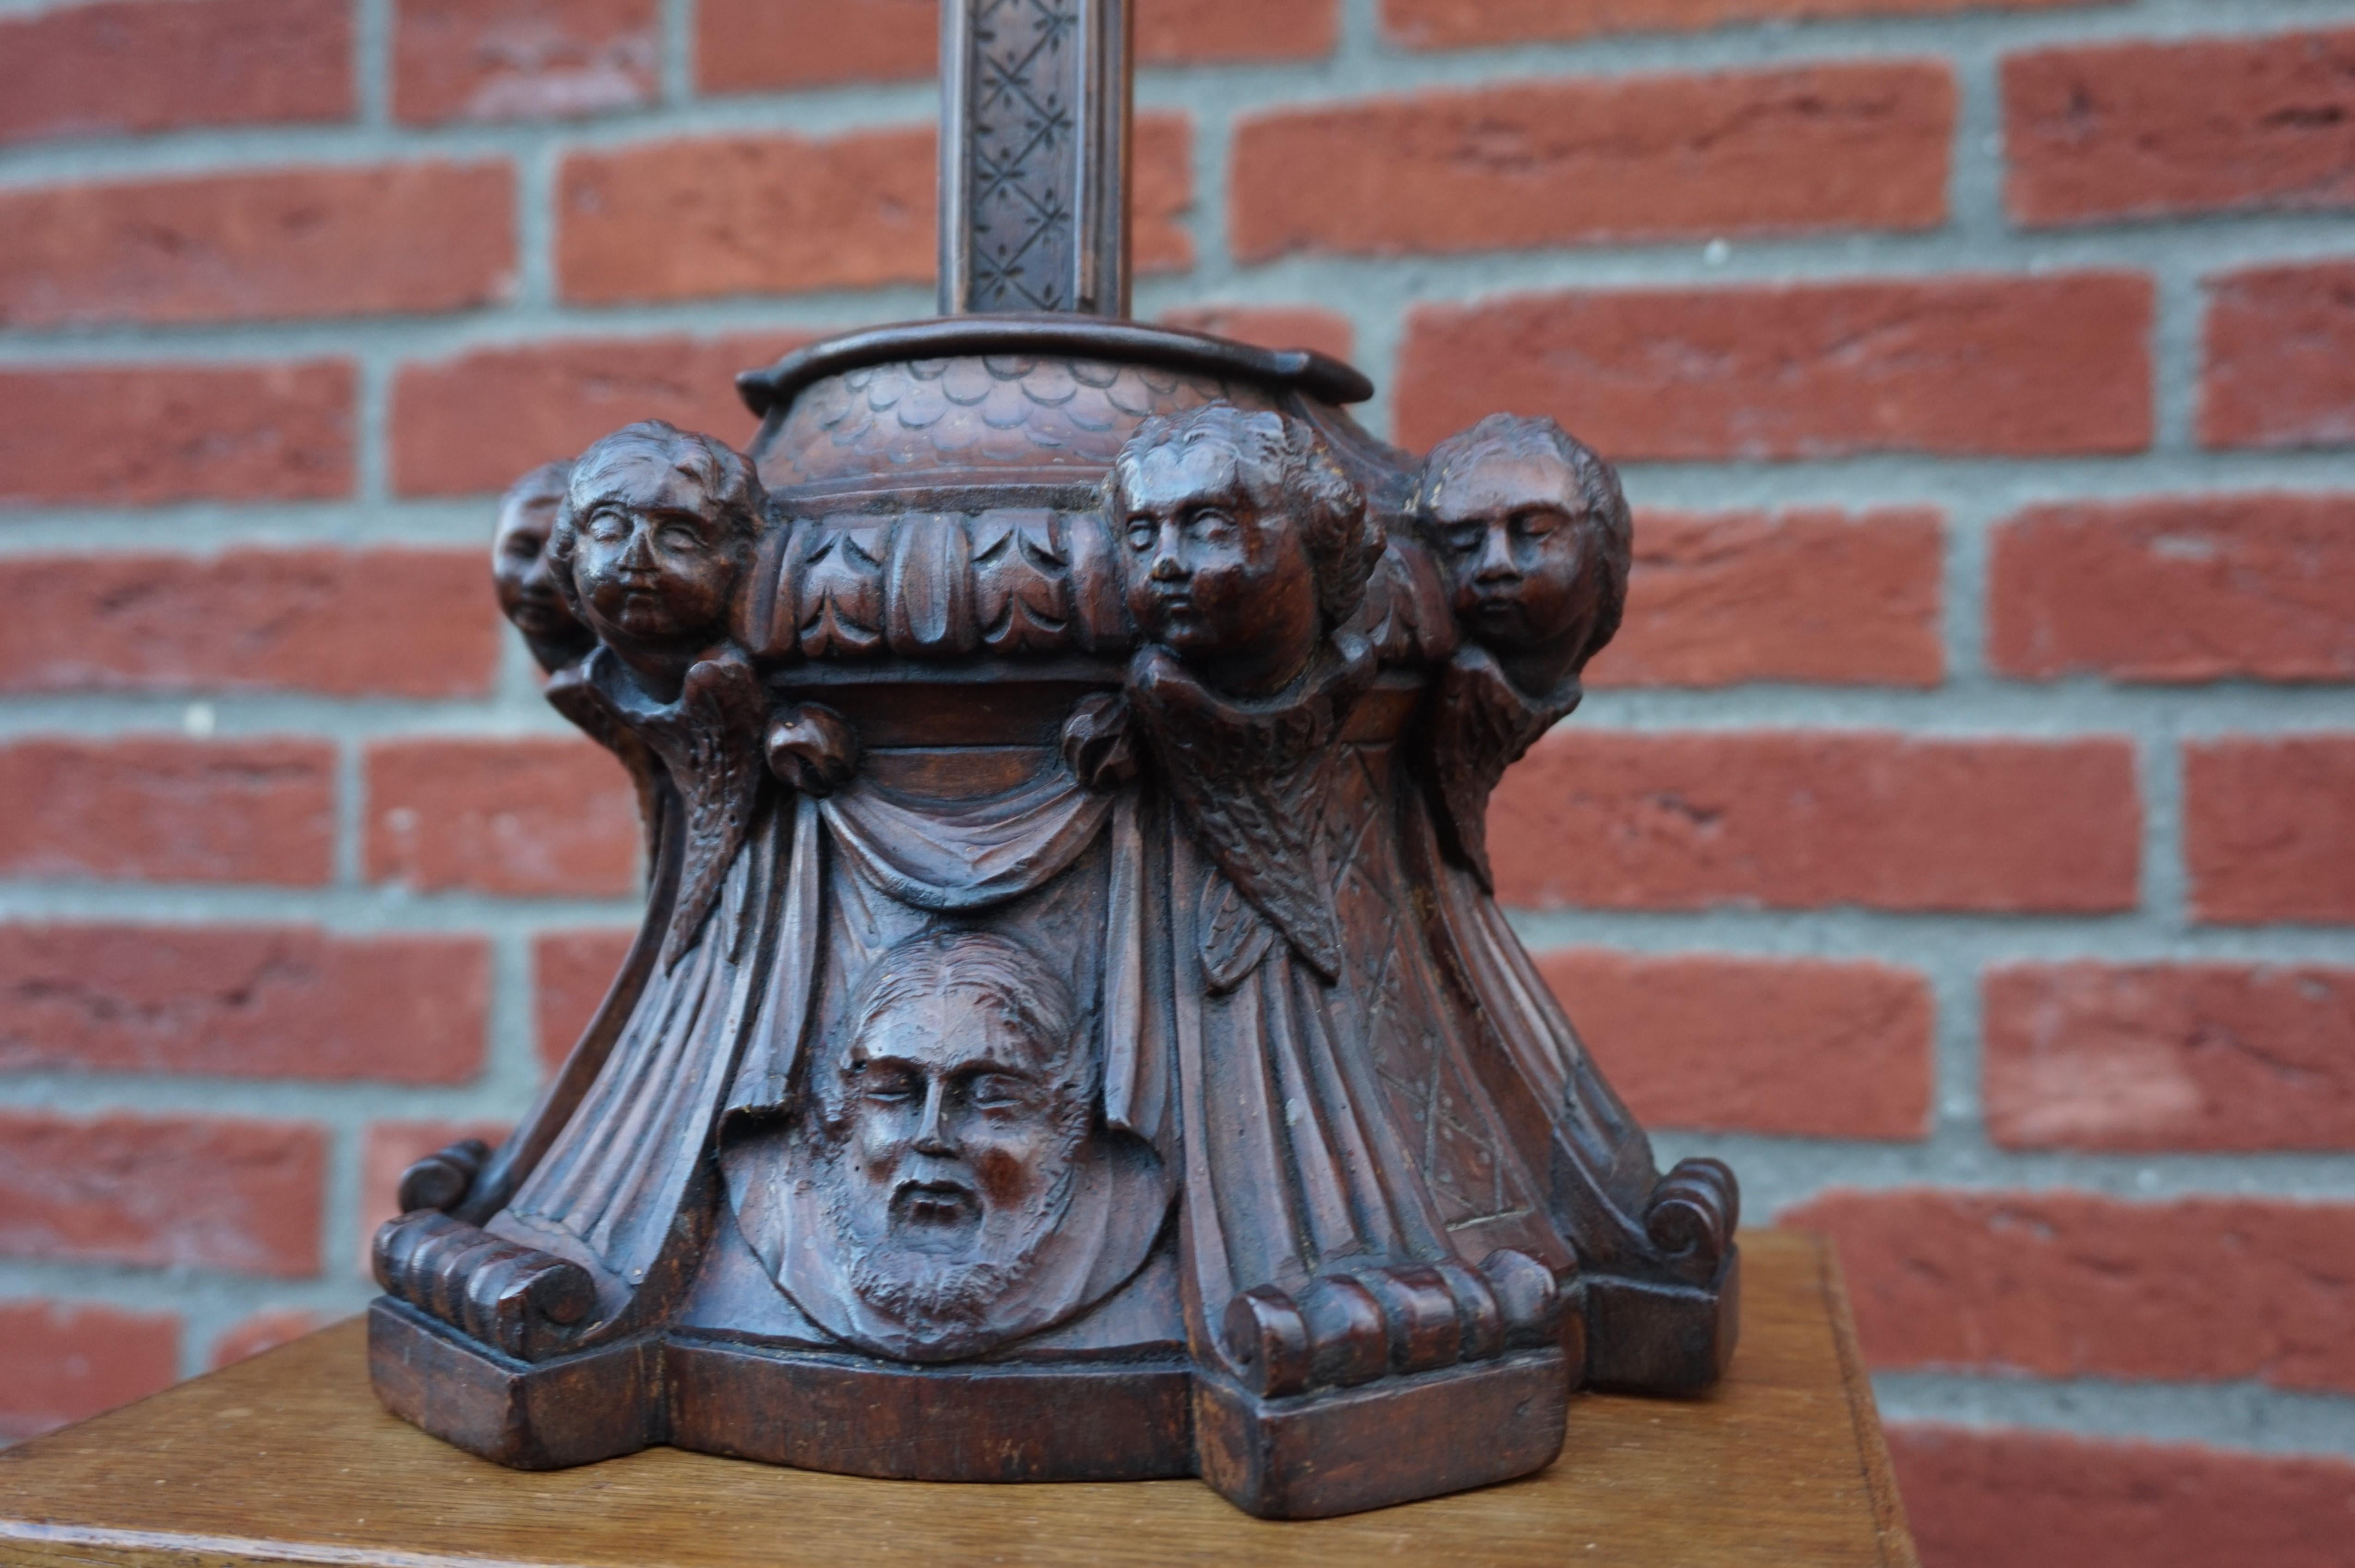 Crucifix from the mid-1800s with a carved shroud or veil depicting Christ in the base.

This unique and remarkable antique crucifix can both be used as a table and as a wall crucifix. Over the decades we have sold a number of unique and very well